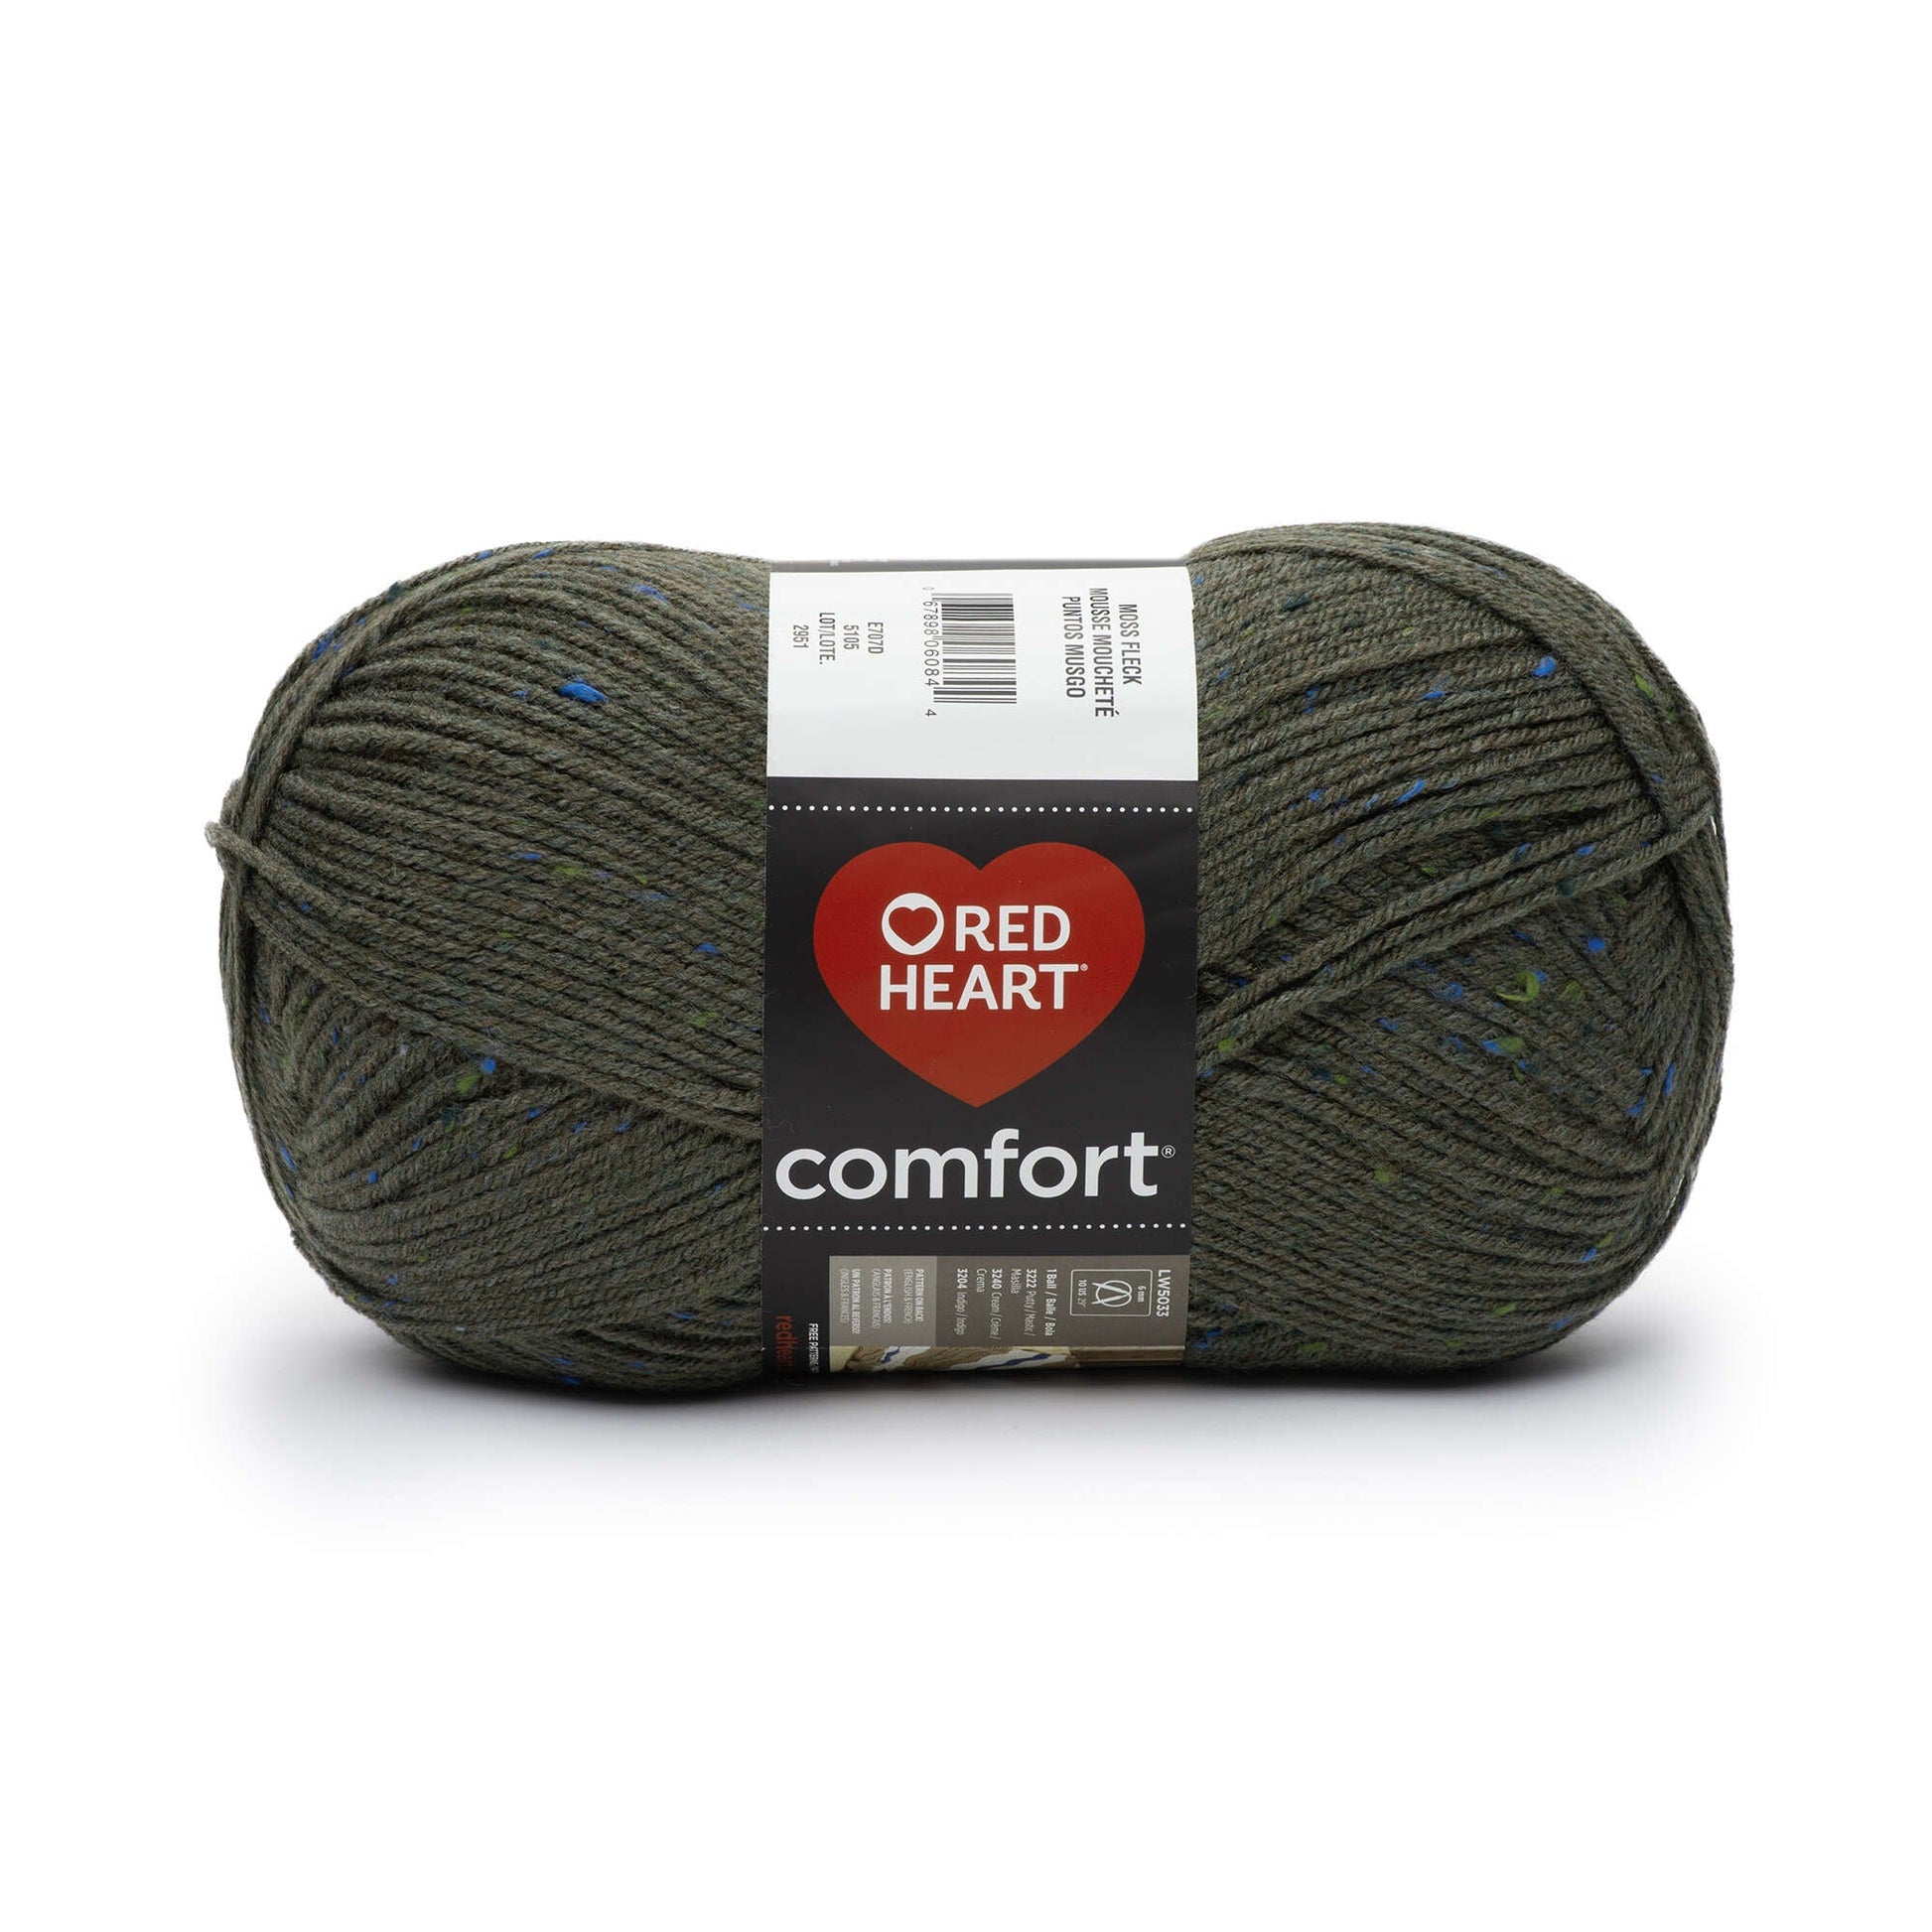 Red Heart Comfort Yarn - Discontinued Shades